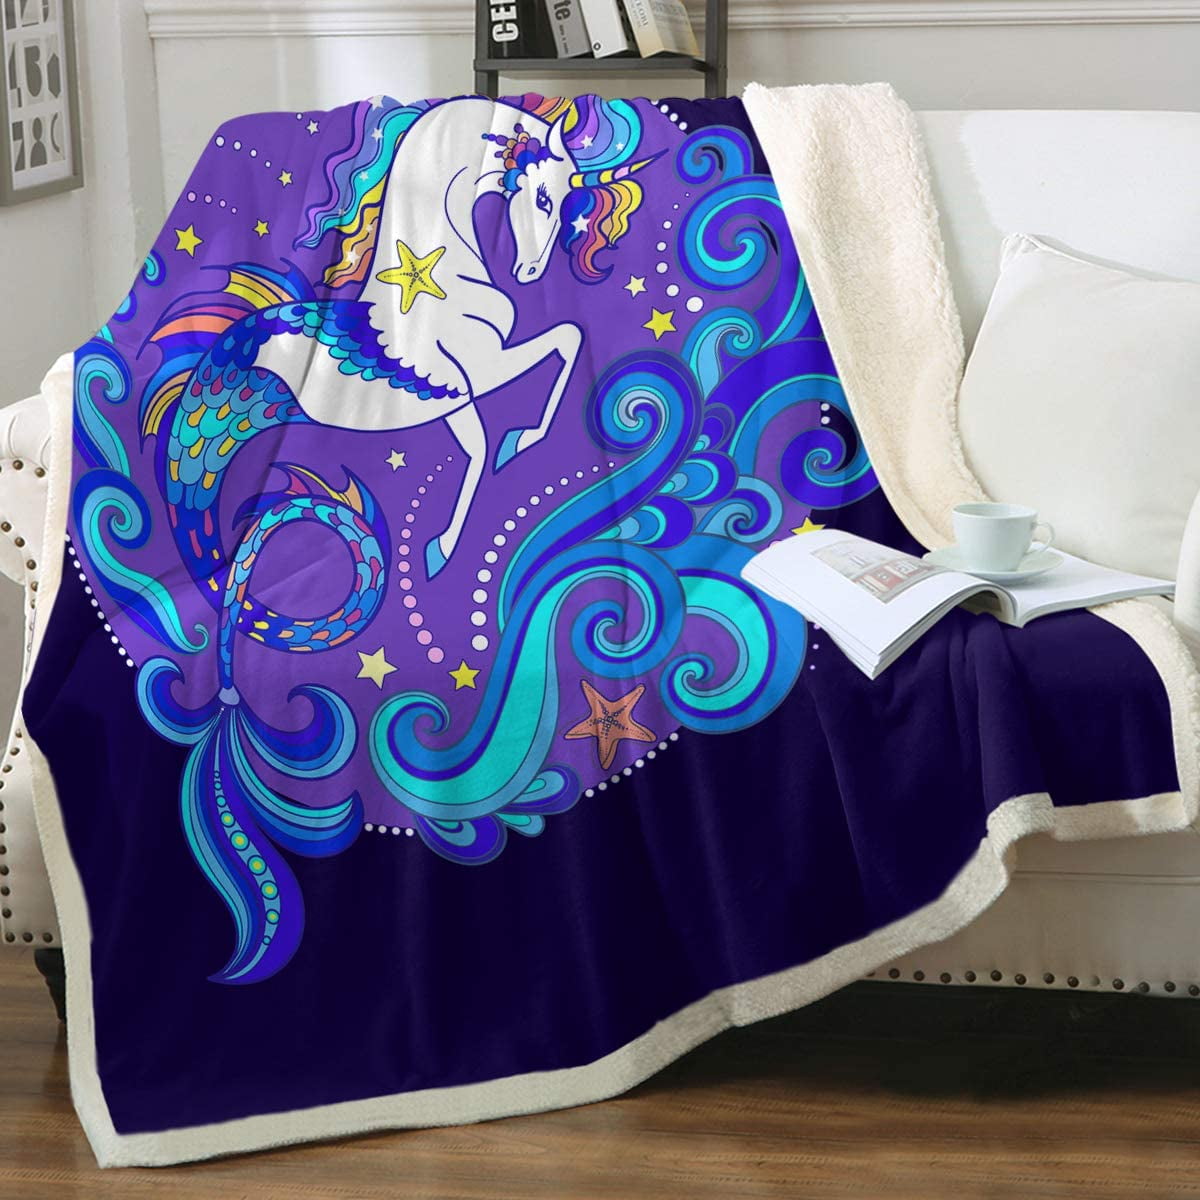 UNICORN PURPLE GIRLS FLANNEL BLANKET WITH SHERPA SOFTY AND WARM 2 PCS TWIN SIZE 